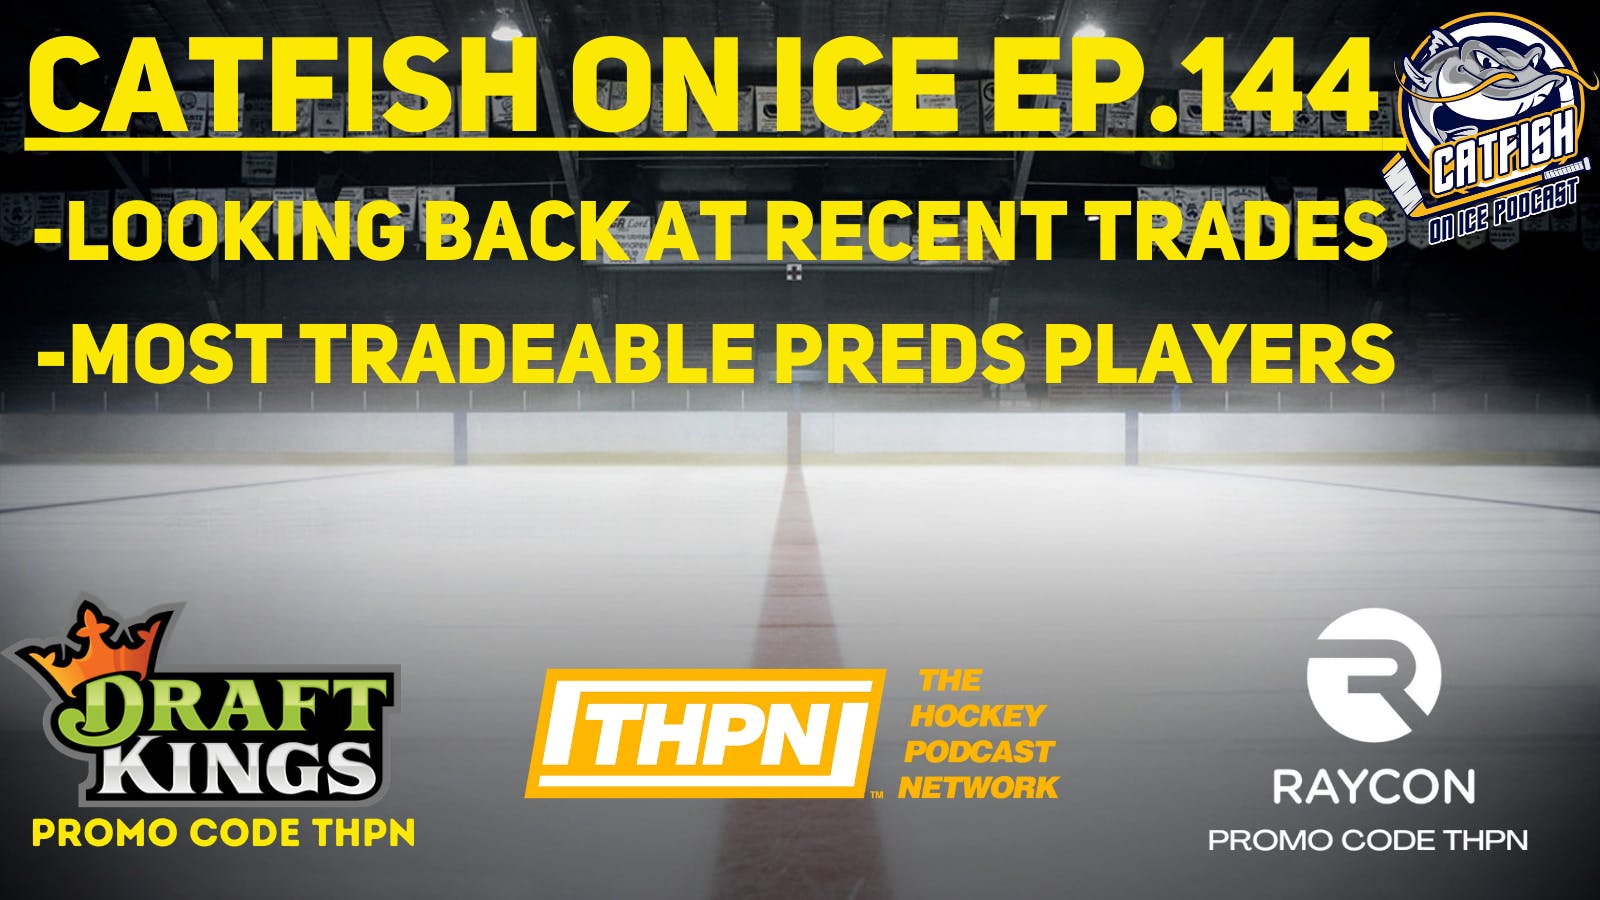 CATFISH ON ICE EP.144: The Top Trade Pieces for the Nashville Predators Going into Season